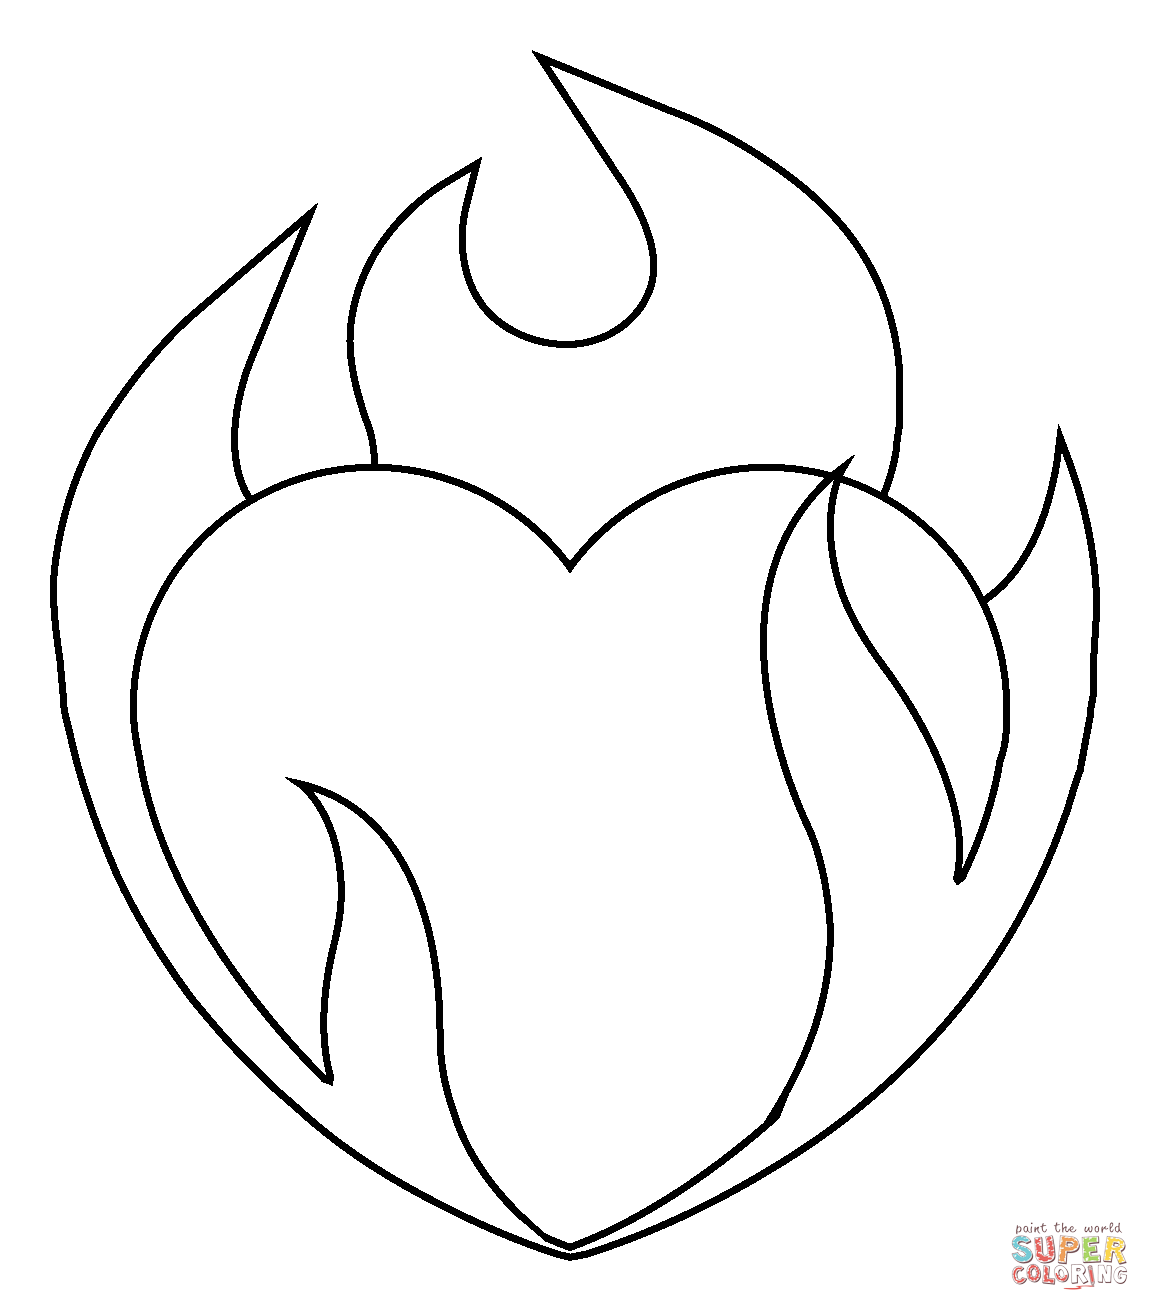 Heart on Fire Emoji coloring page | Free Printable Coloring Pages